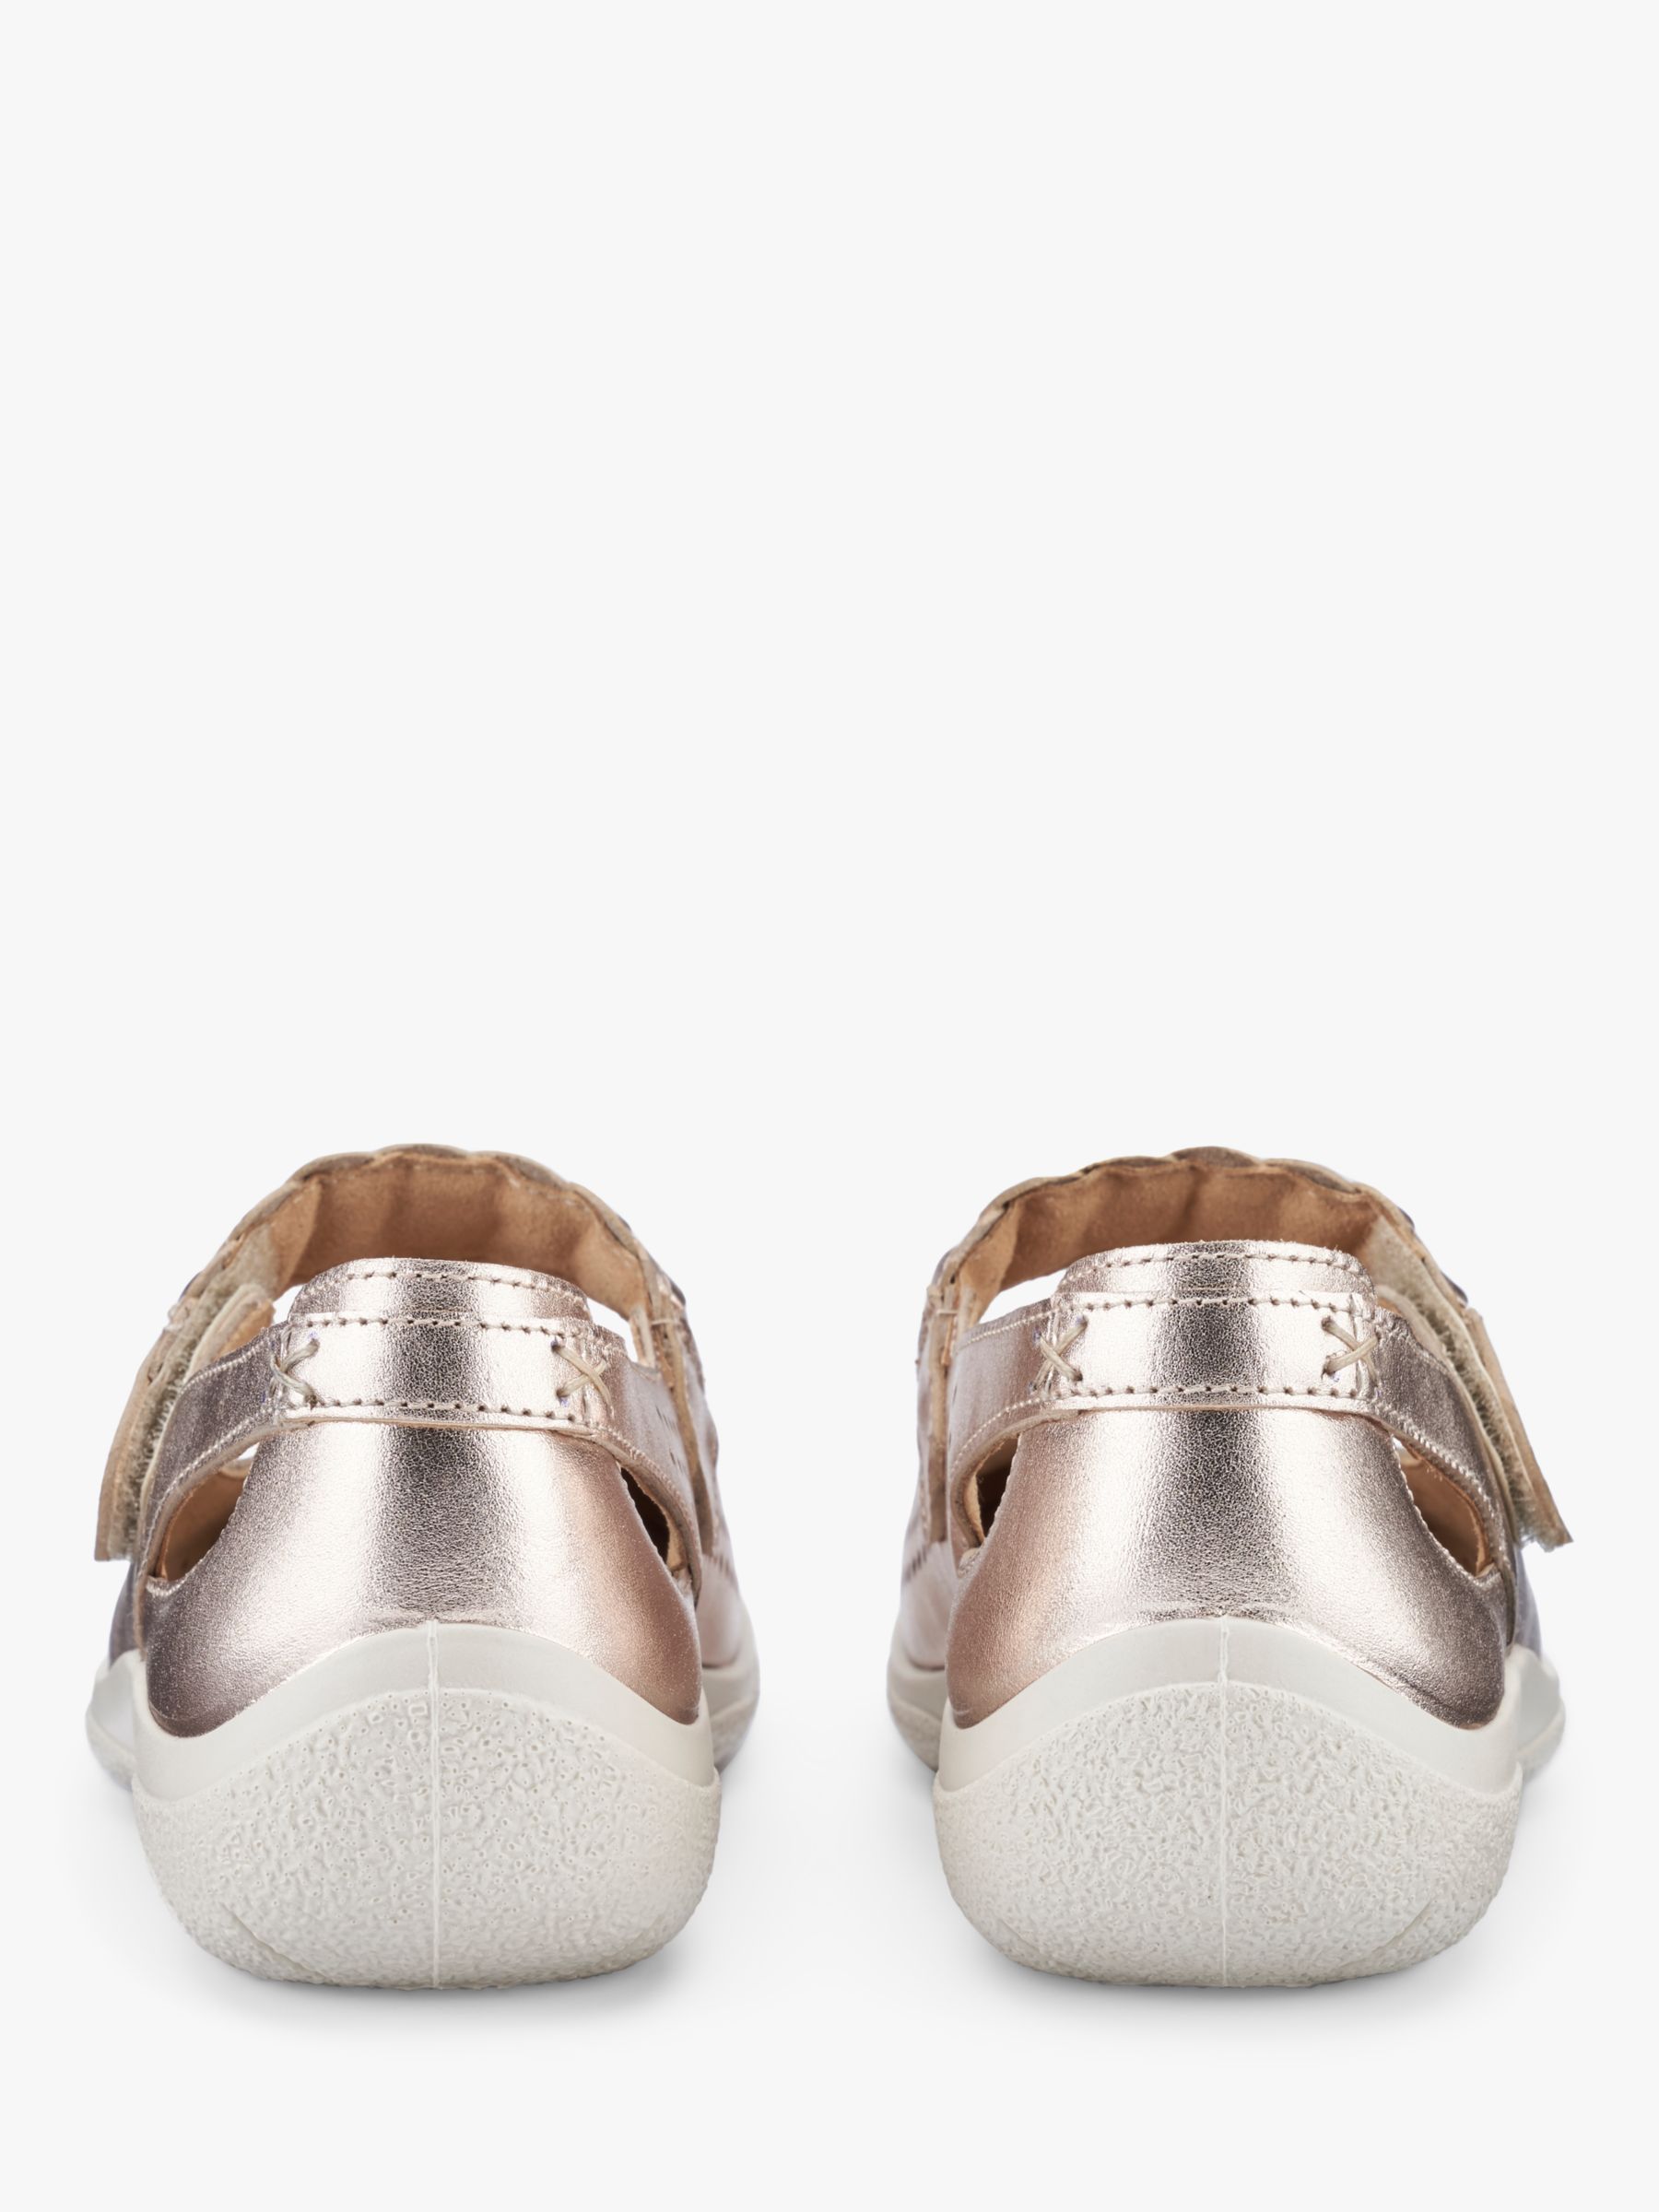 Buy Hotter Quake II Extra Wide Fit Perforated Leather Mary Jane Shoes, Soft Gold Online at johnlewis.com